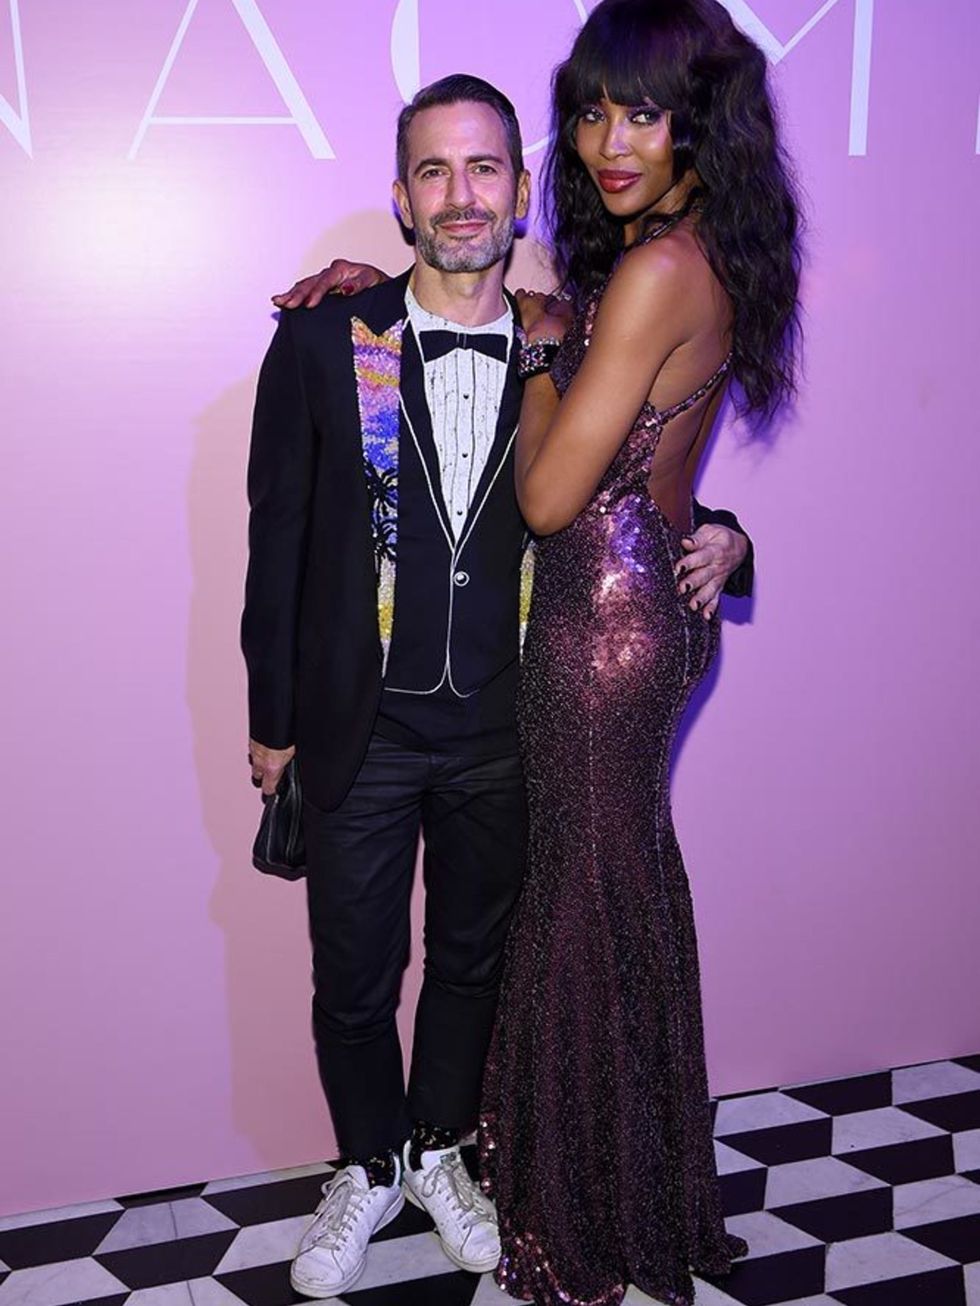 Marc Jacobs and Naomi Campbell at the launch of Naomi at the Diamond Horseshoe in New York, April 2016.